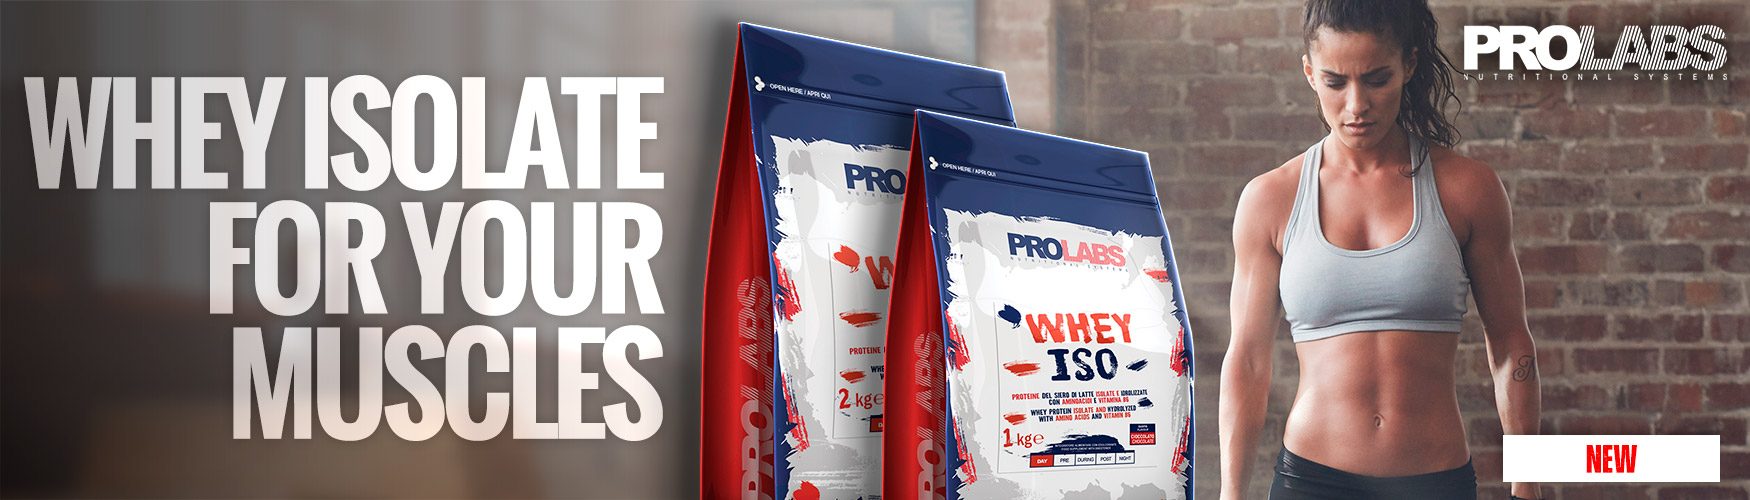 Prolabs---WEB---WHEY-ISO---BANNER-ENG